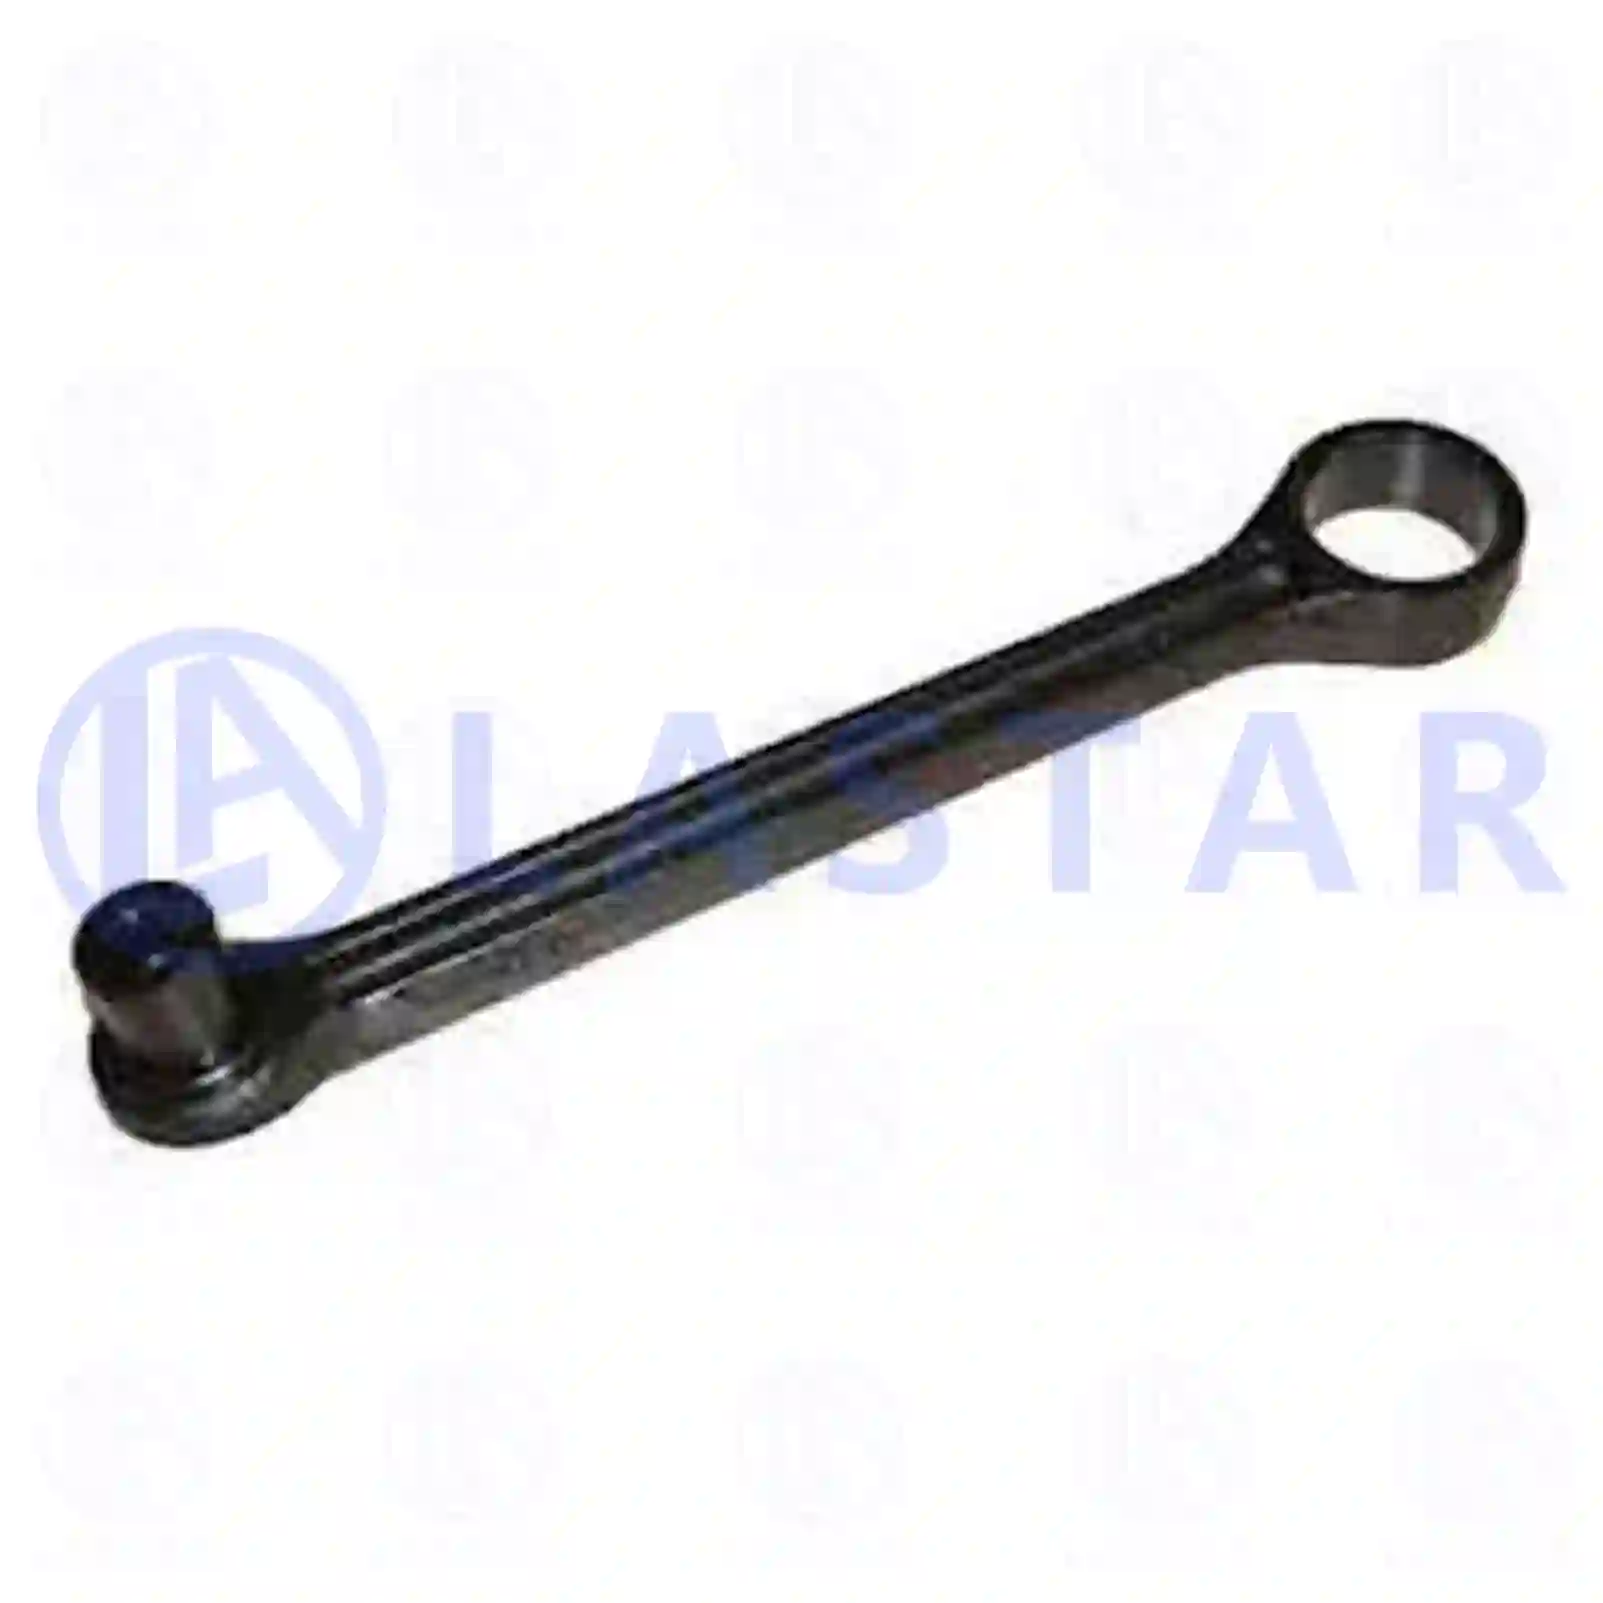 Connecting rod, stabilizer, 77727930, 9493230011 ||  77727930 Lastar Spare Part | Truck Spare Parts, Auotomotive Spare Parts Connecting rod, stabilizer, 77727930, 9493230011 ||  77727930 Lastar Spare Part | Truck Spare Parts, Auotomotive Spare Parts